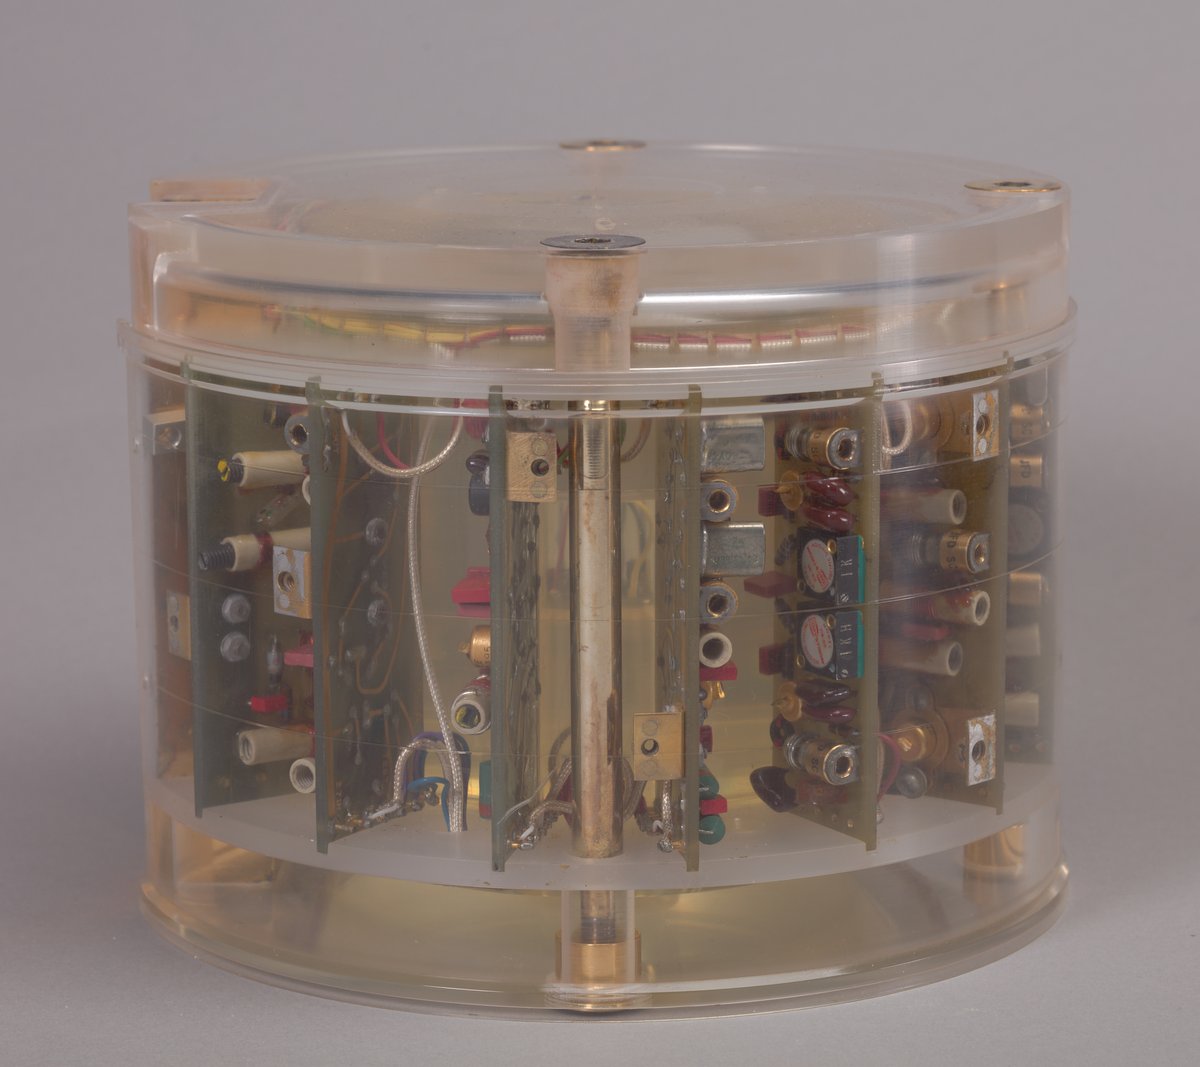 this module is made of transparent plastic, and has cards arranged radially inside. i'm not sure what it does, the middle is hollow. perhaps it is some sort of scientific instrument? perhaps for measuring atmospheric gases?